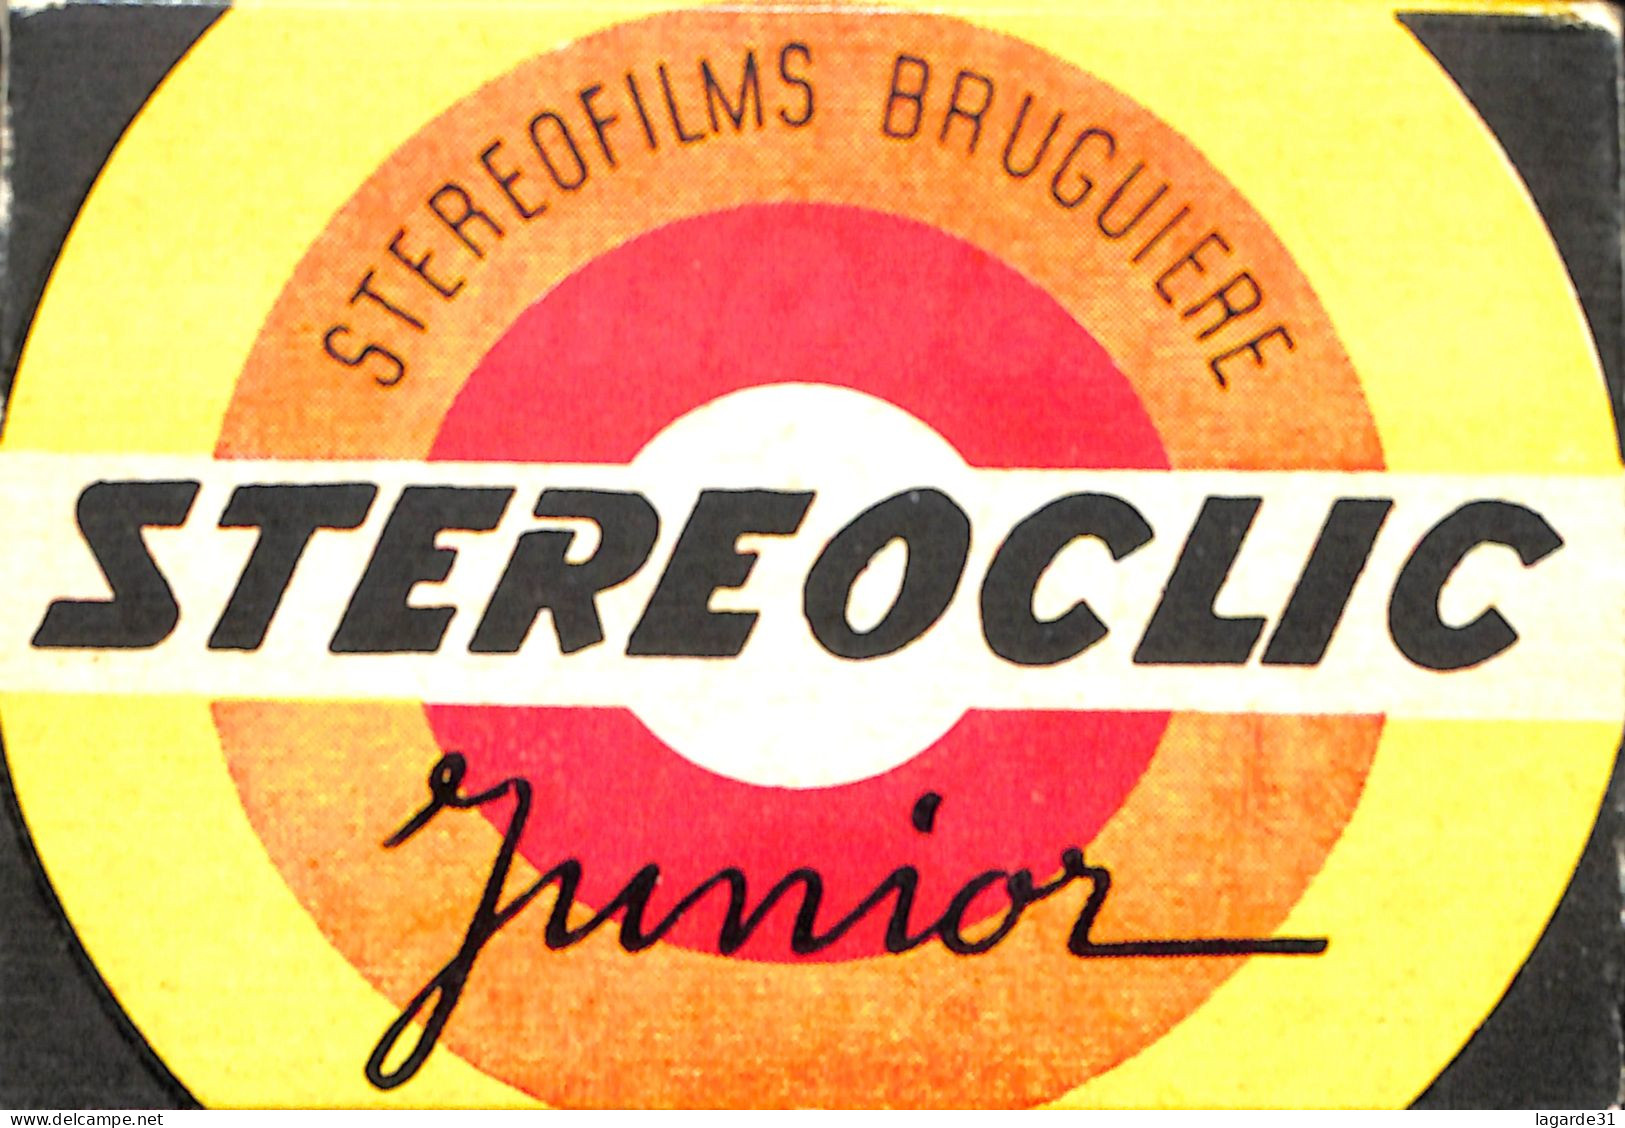 Stereoscope "stereoclic" Et Stereocartes Brugiere - Stereoscoopen